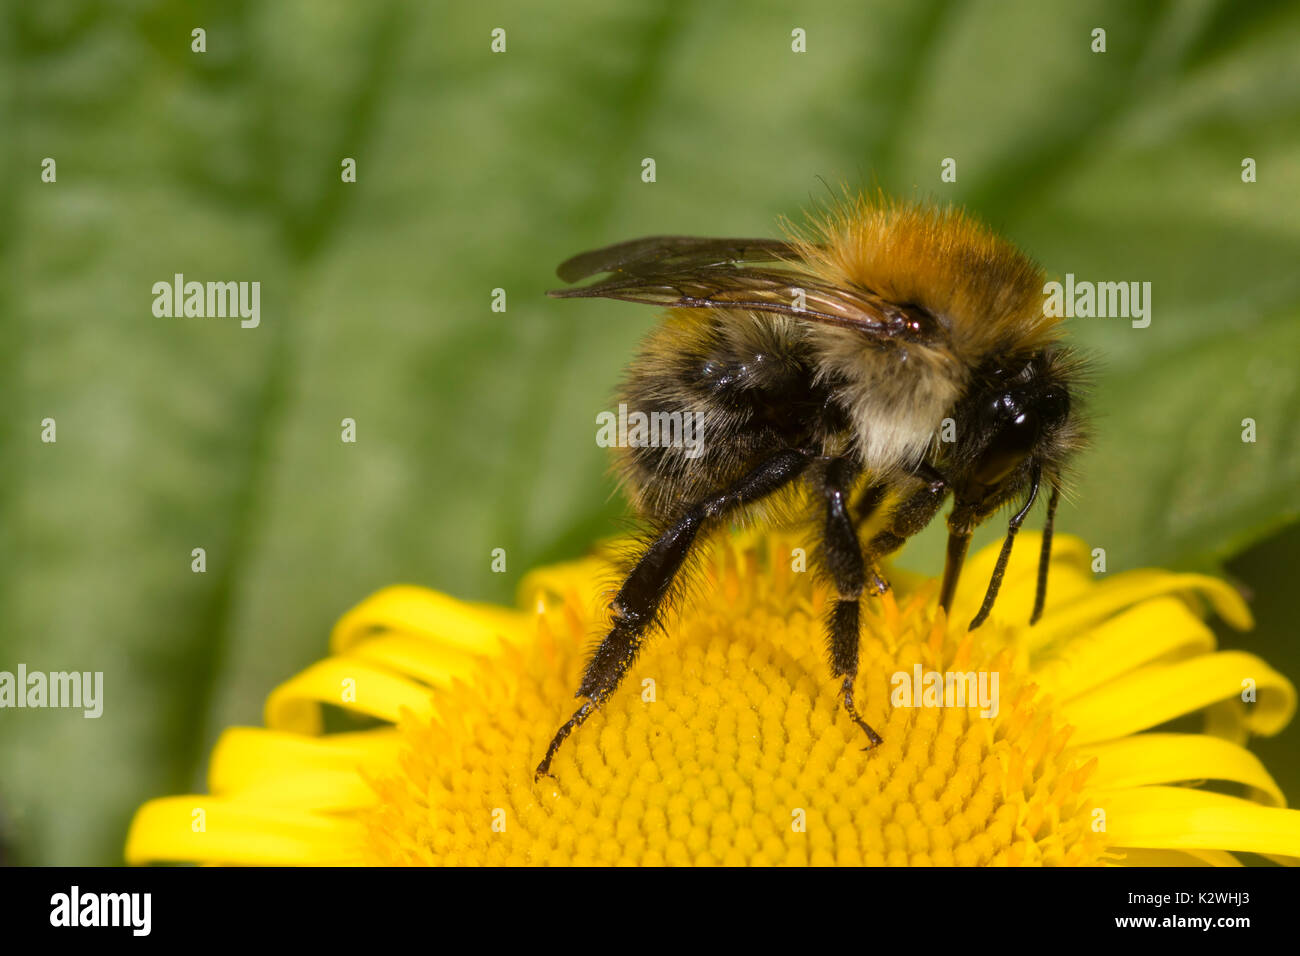 Worker of the Common carder bee, Bombus pascuorum, feeding on common fleabane, Pulicaria dysenterica Stock Photo